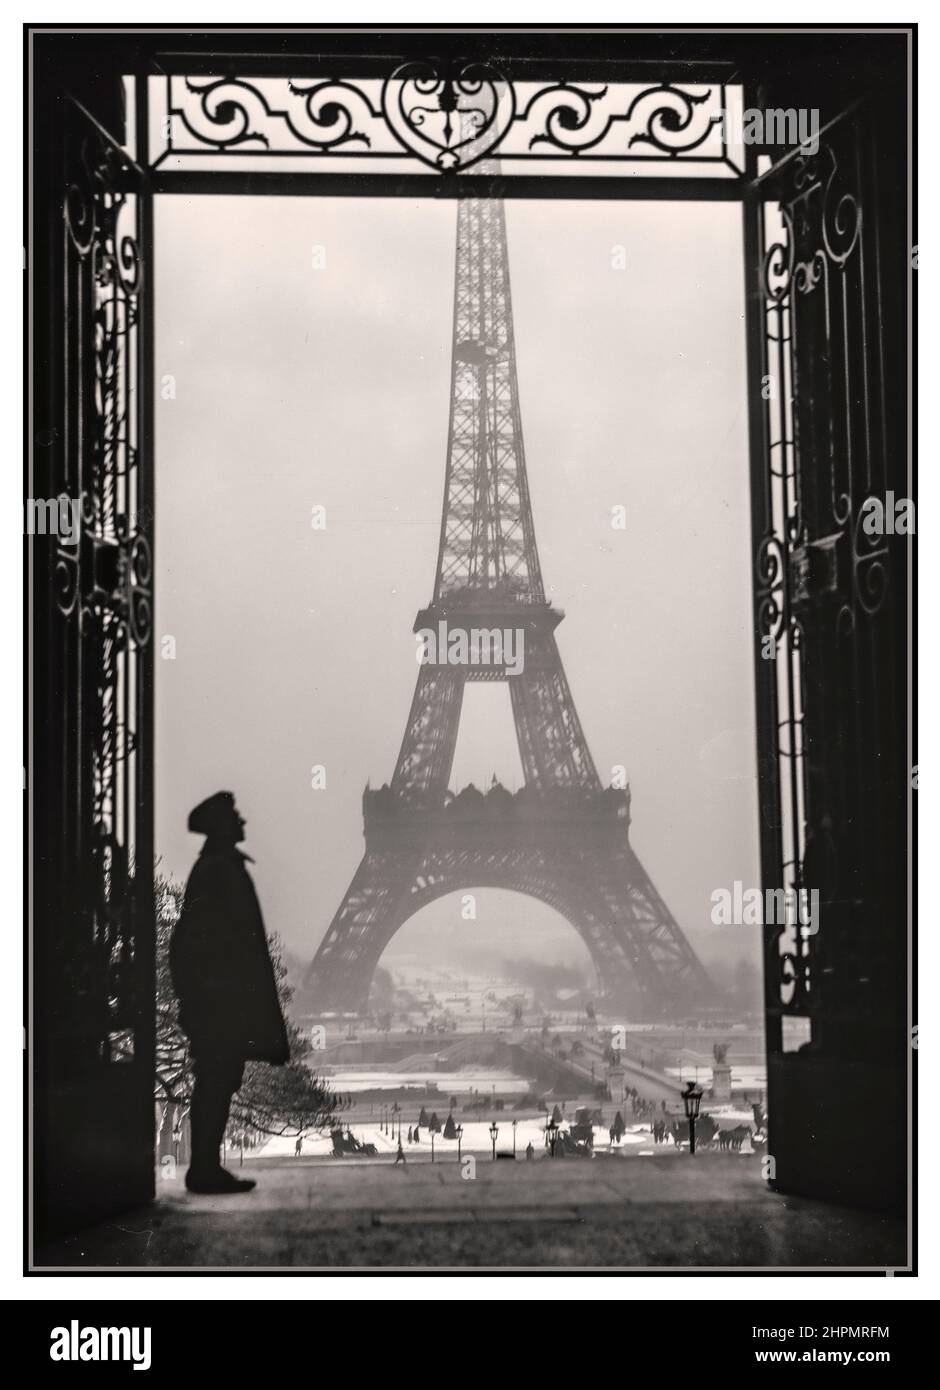 EIFFEL TOWER 1919 Paris retro vintage historic B&W with Eiffel Tower and French soldier on guard, taken in winter at the end of World War 1 by Lewis Wickes Hine 1874-1940 photographer Stock Photo